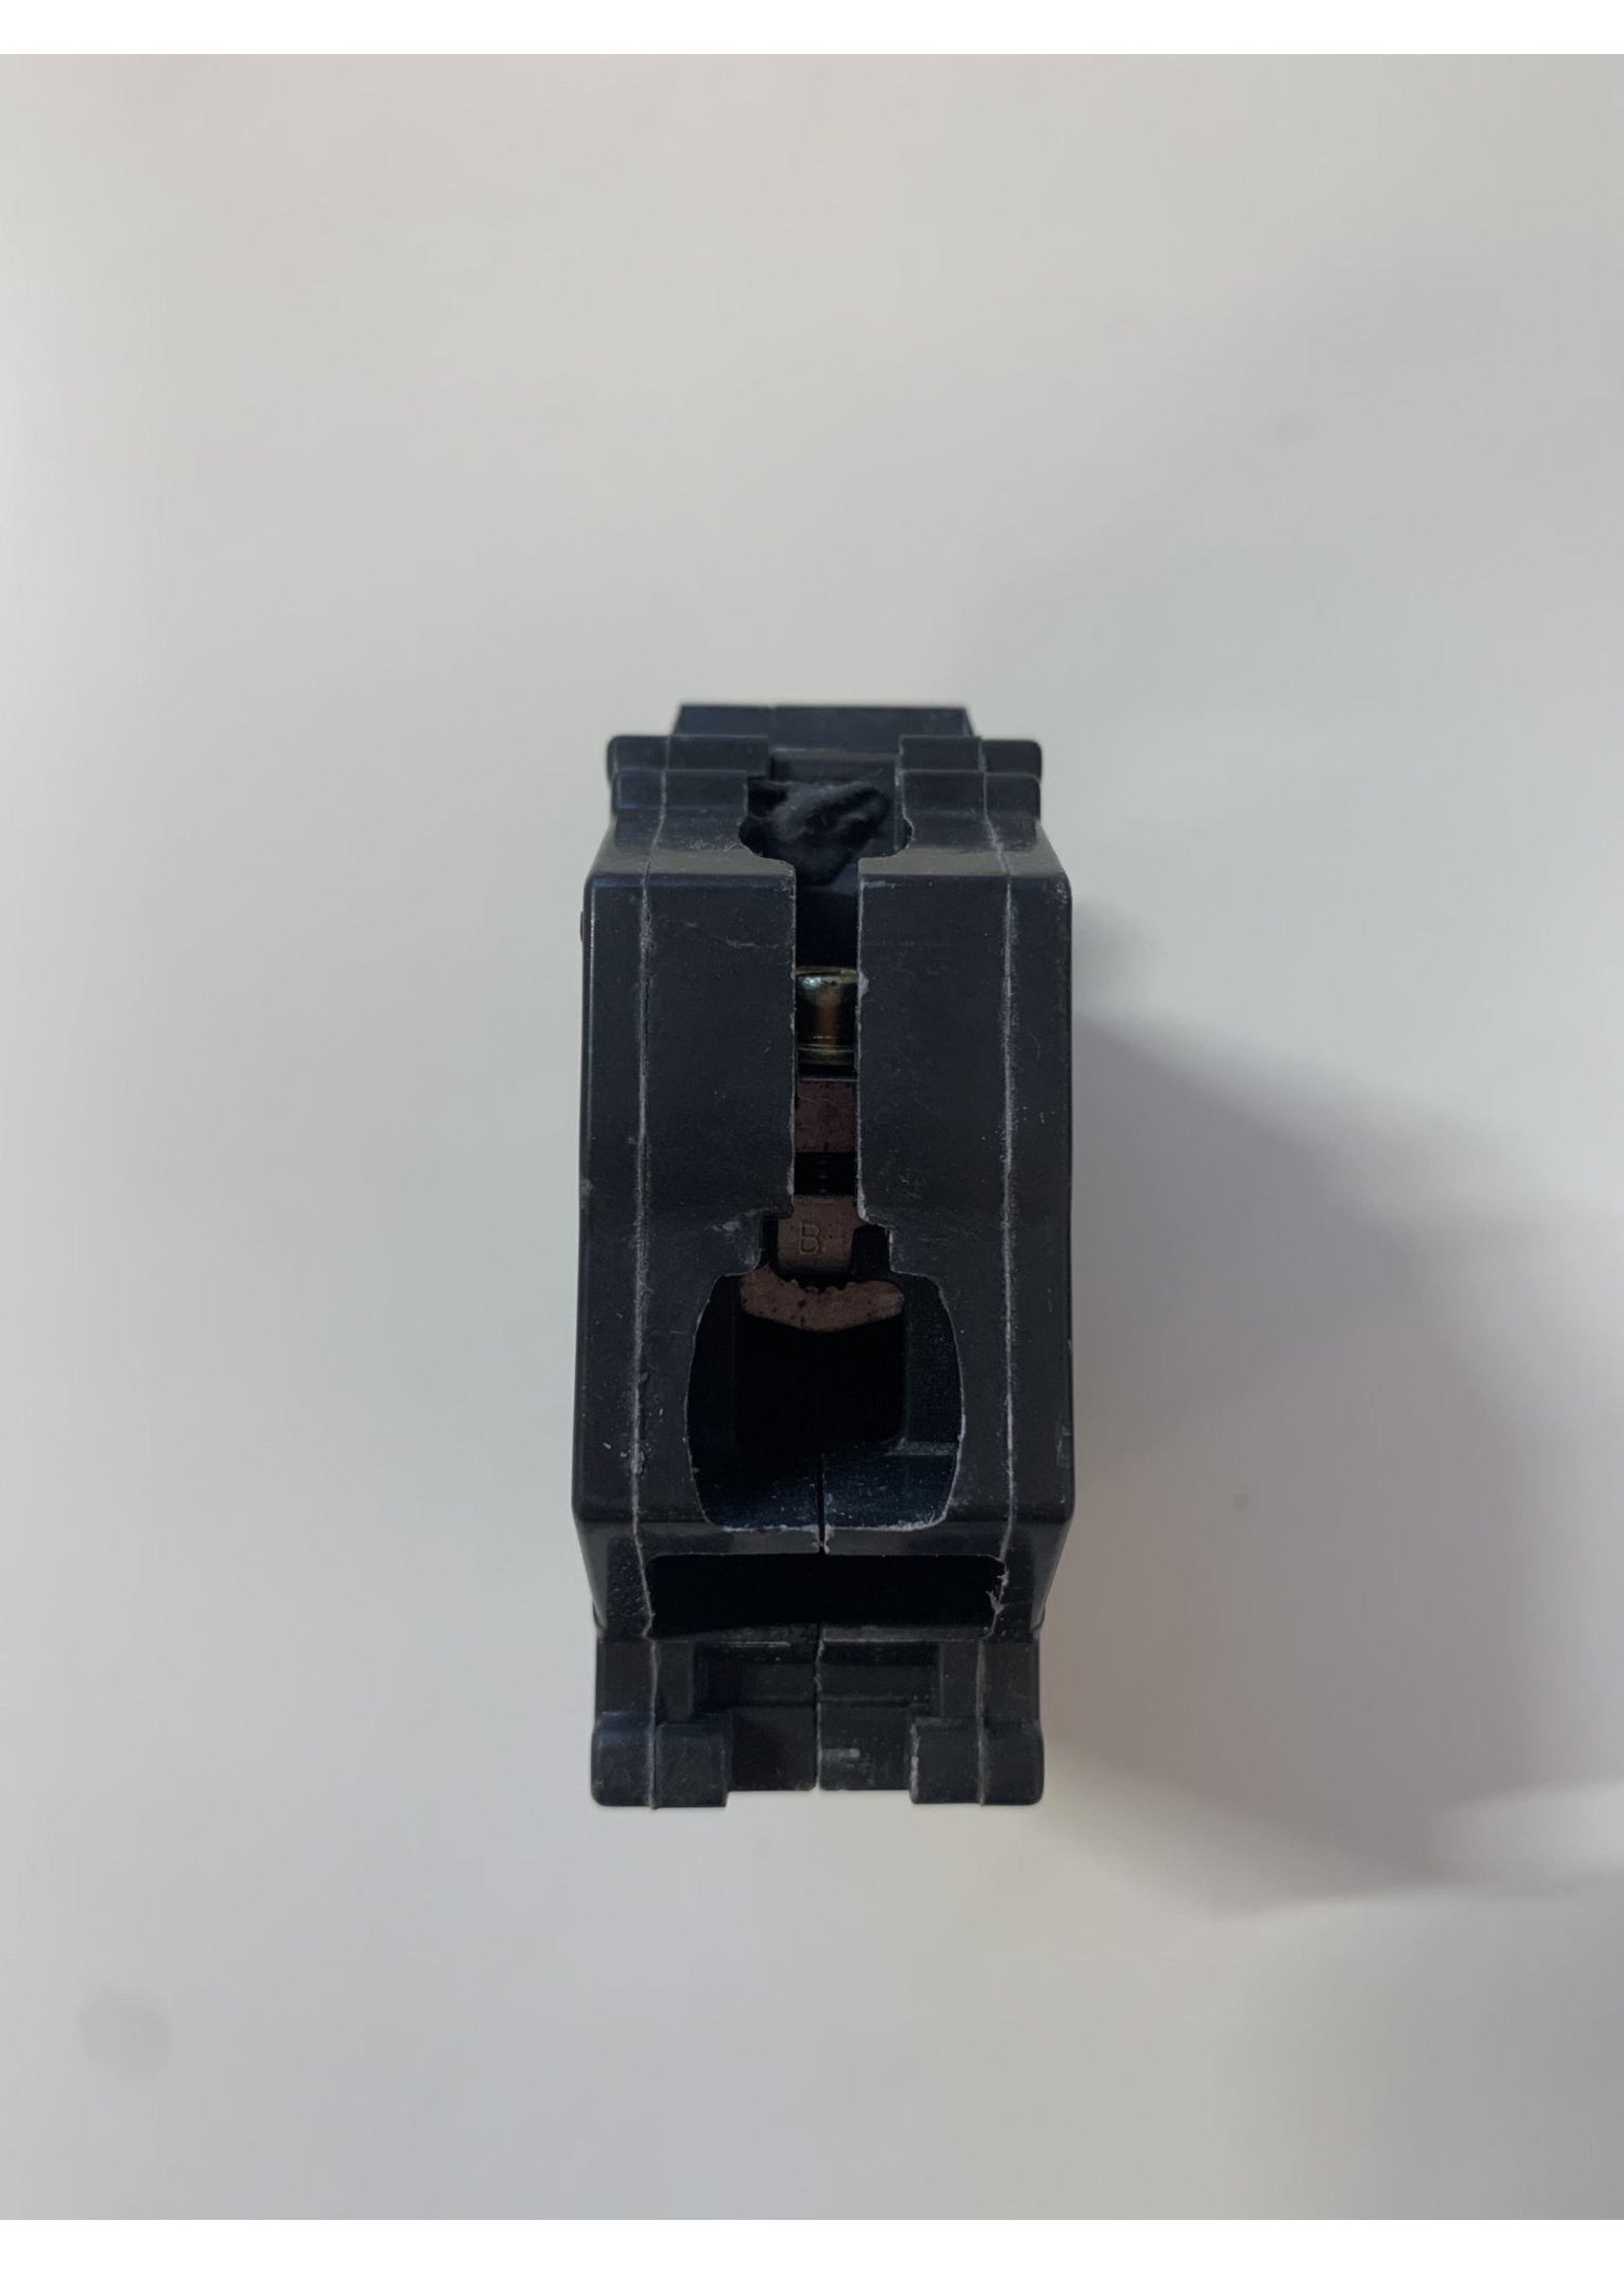 GE BREAKER THICK POLE 1-20AMPS (THQL1120)